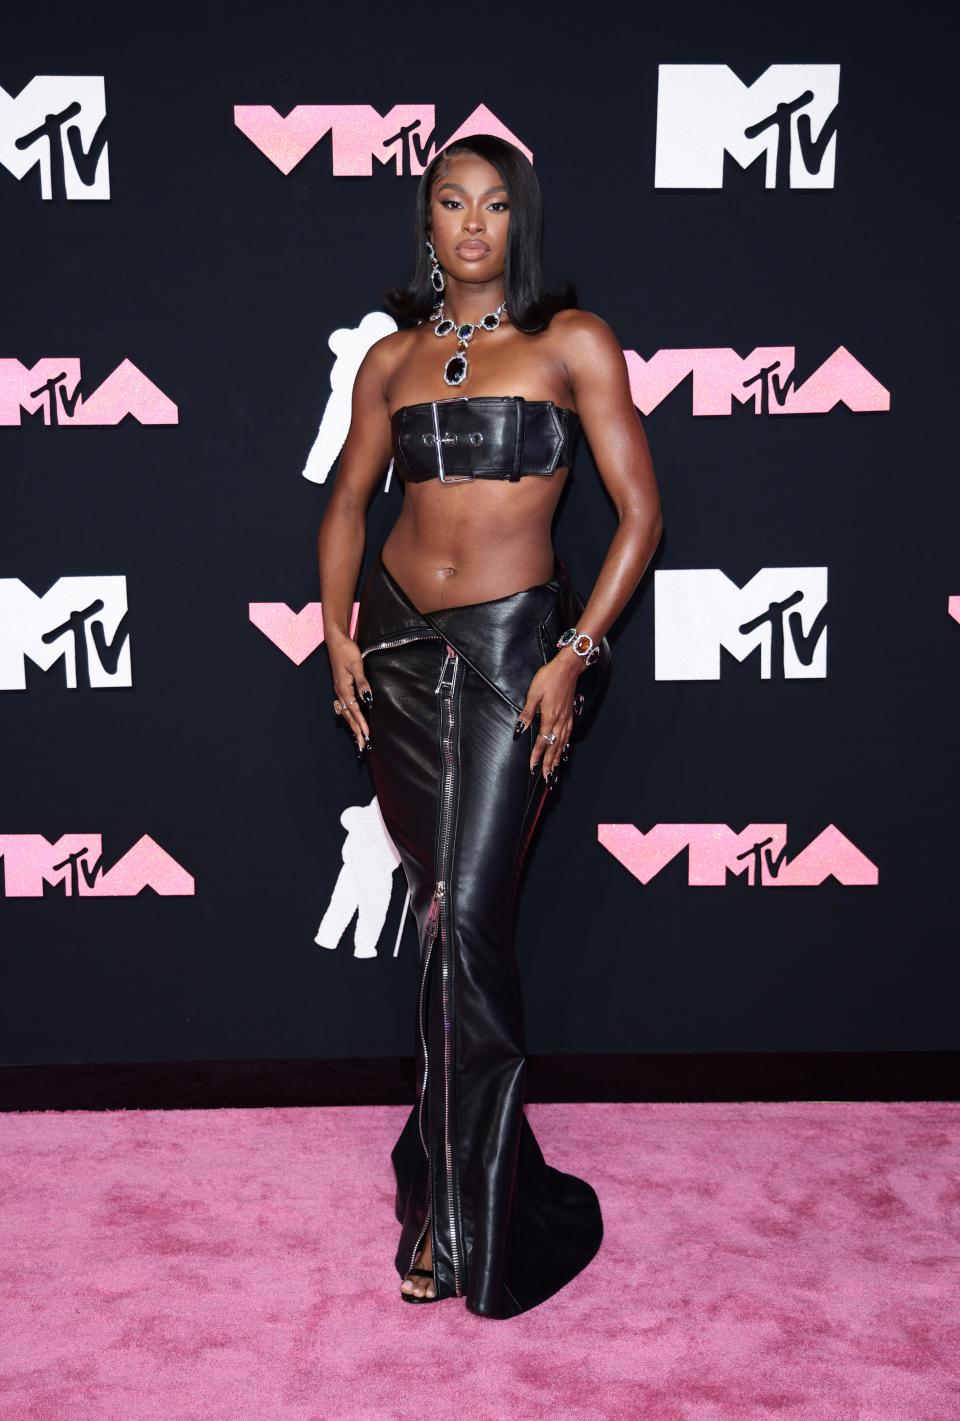 NEWARK, NEW JERSEY - SEPTEMBER 12: Coco Jones attends the 2023 MTV Video Music Awards at the Prudential Center on September 12, 2023 in Newark, New Jersey. (Photo by Dimitrios Kambouris/Getty Images) ORG XMIT: 776018641 ORIG FILE ID: 1676932365